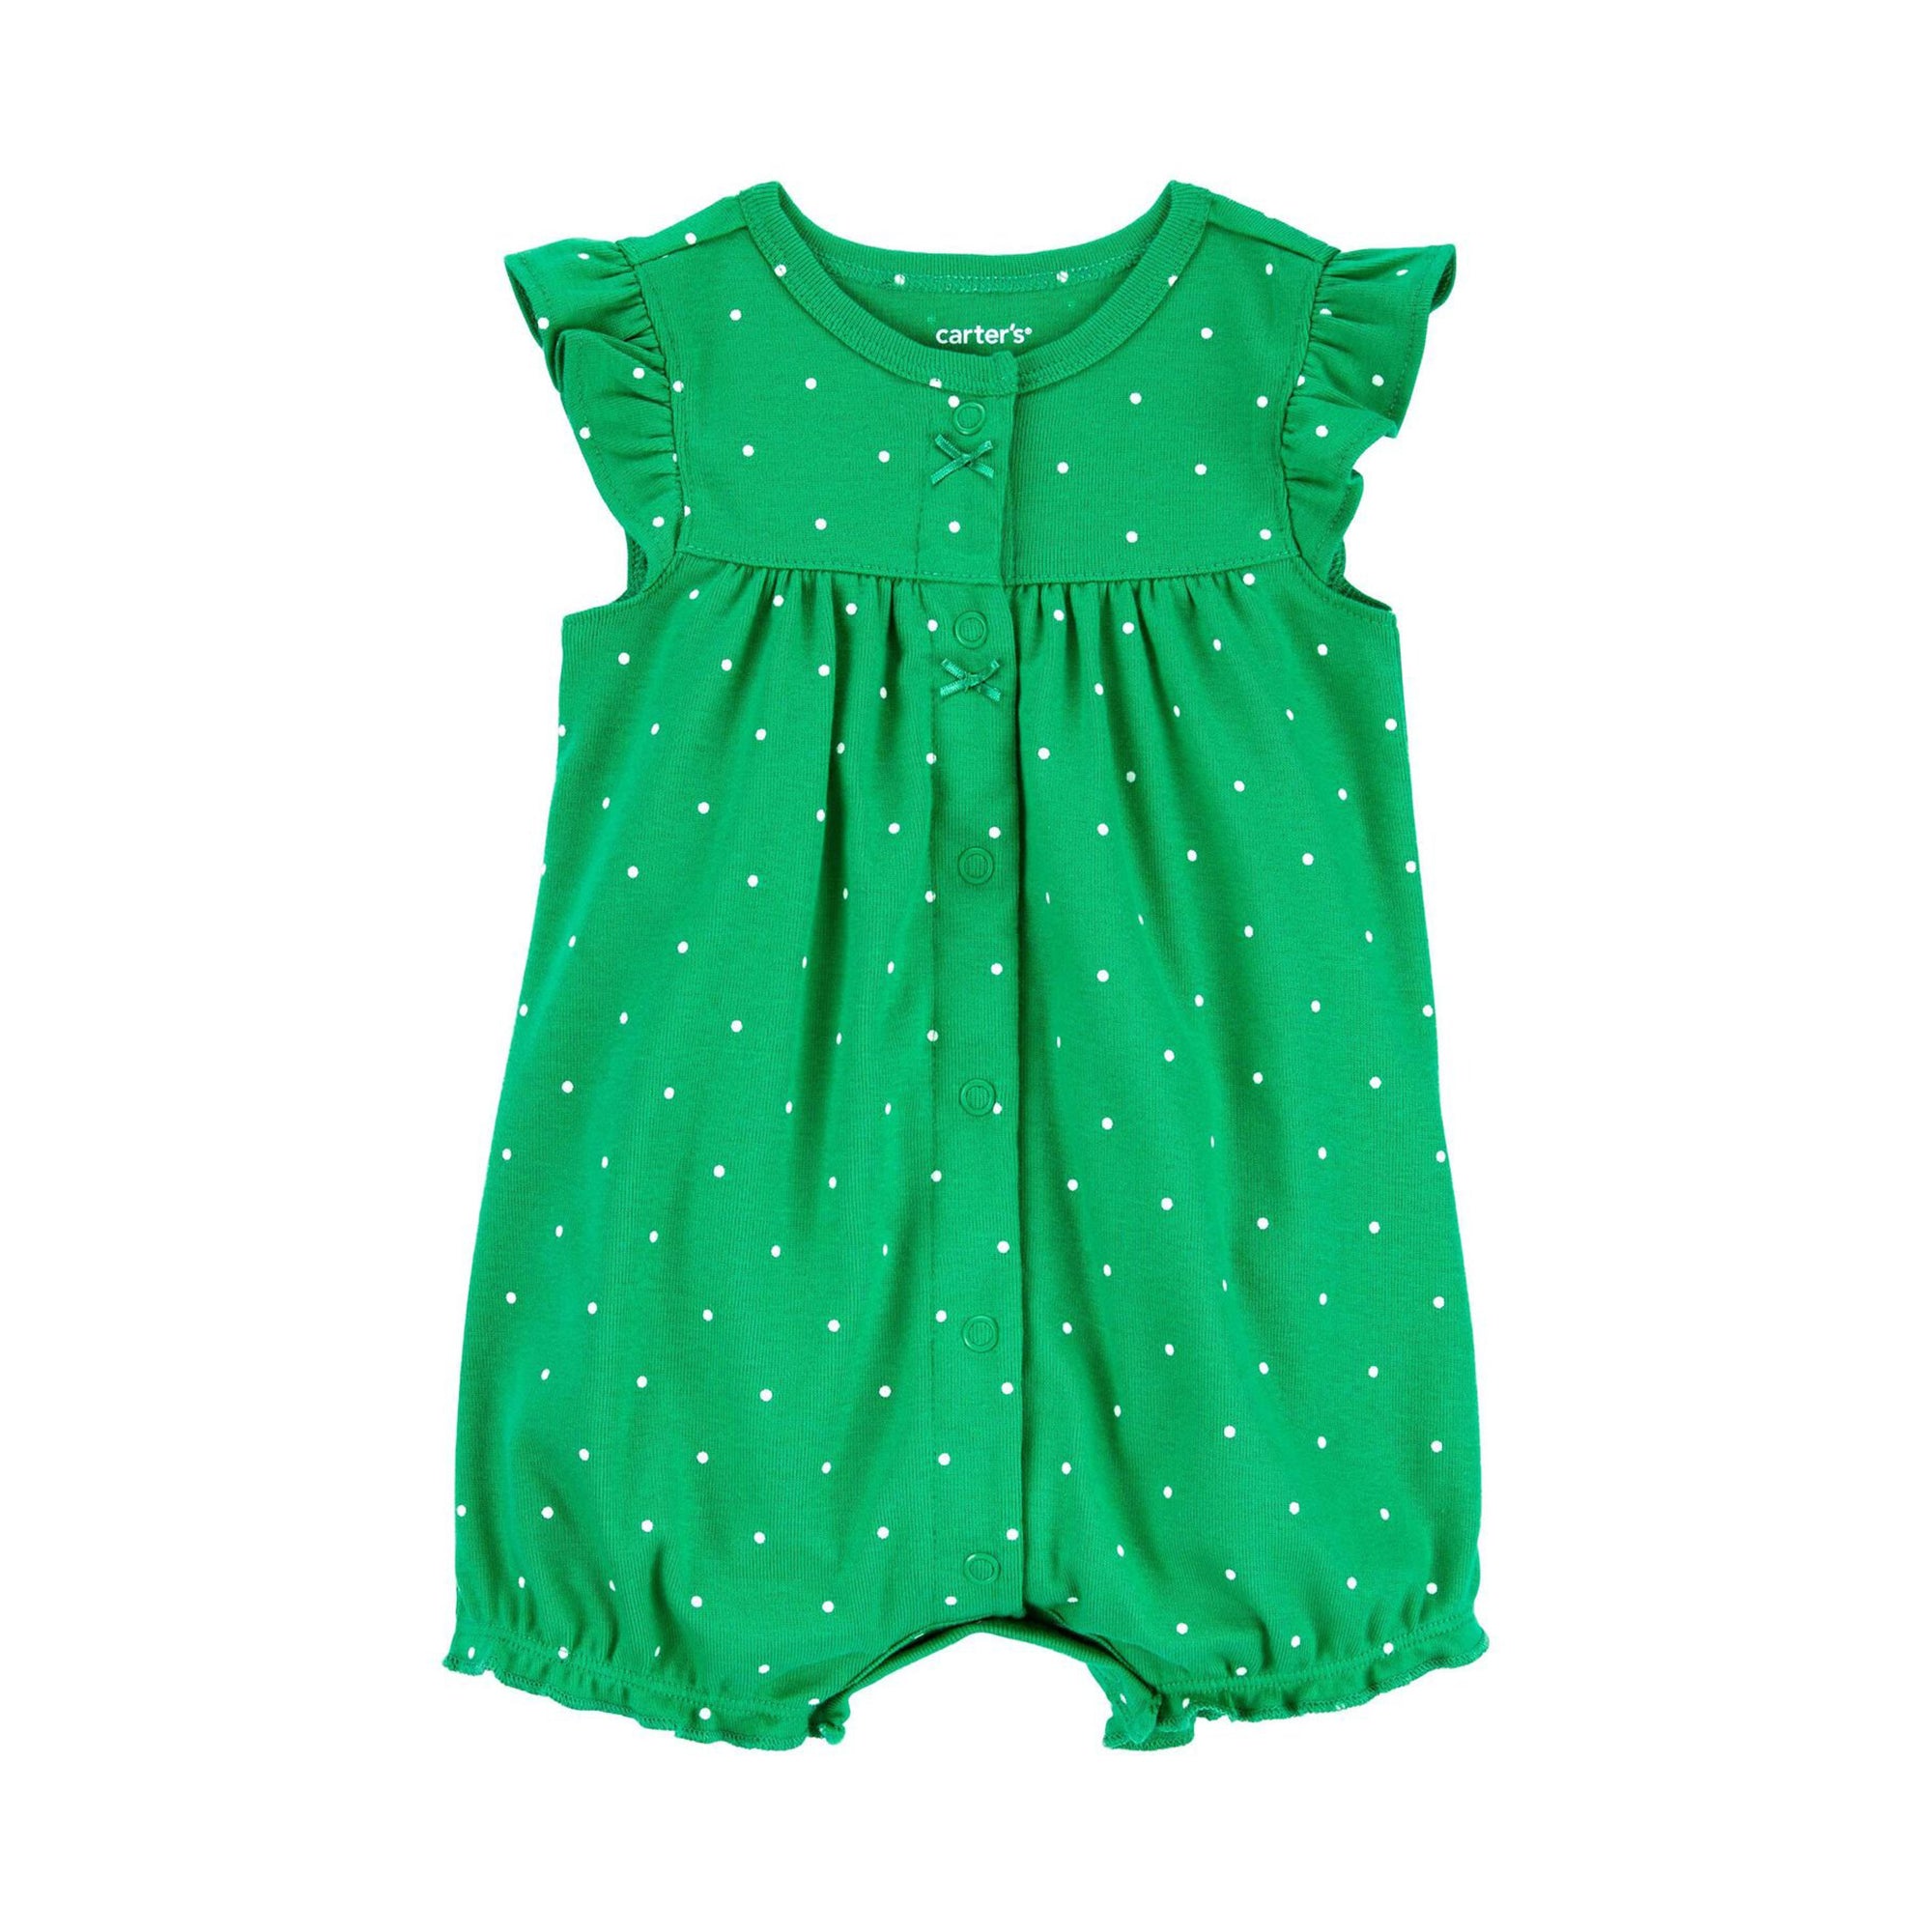 Carter's Butterfly Jumpsuit in the Flowers (6M-24M) – Carter's 